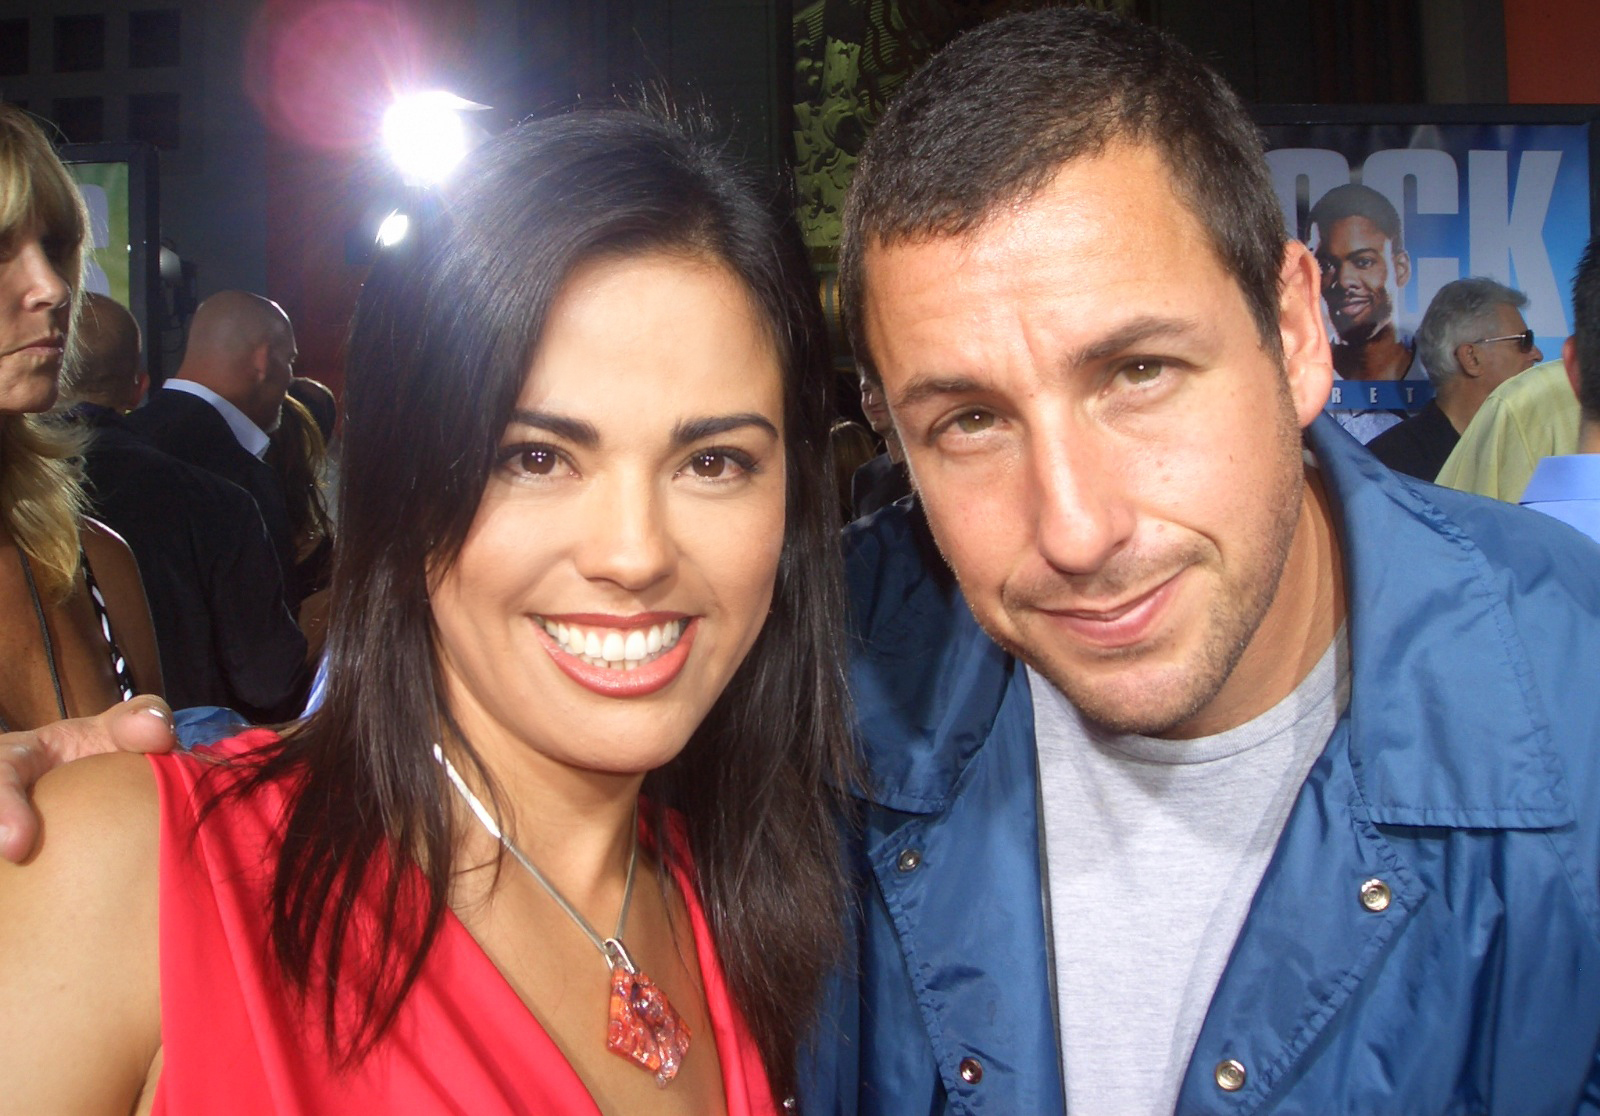 Iran Daniel and Adam Sandler at the Longest Yard Premiere, Chinese Theater, Hollywood